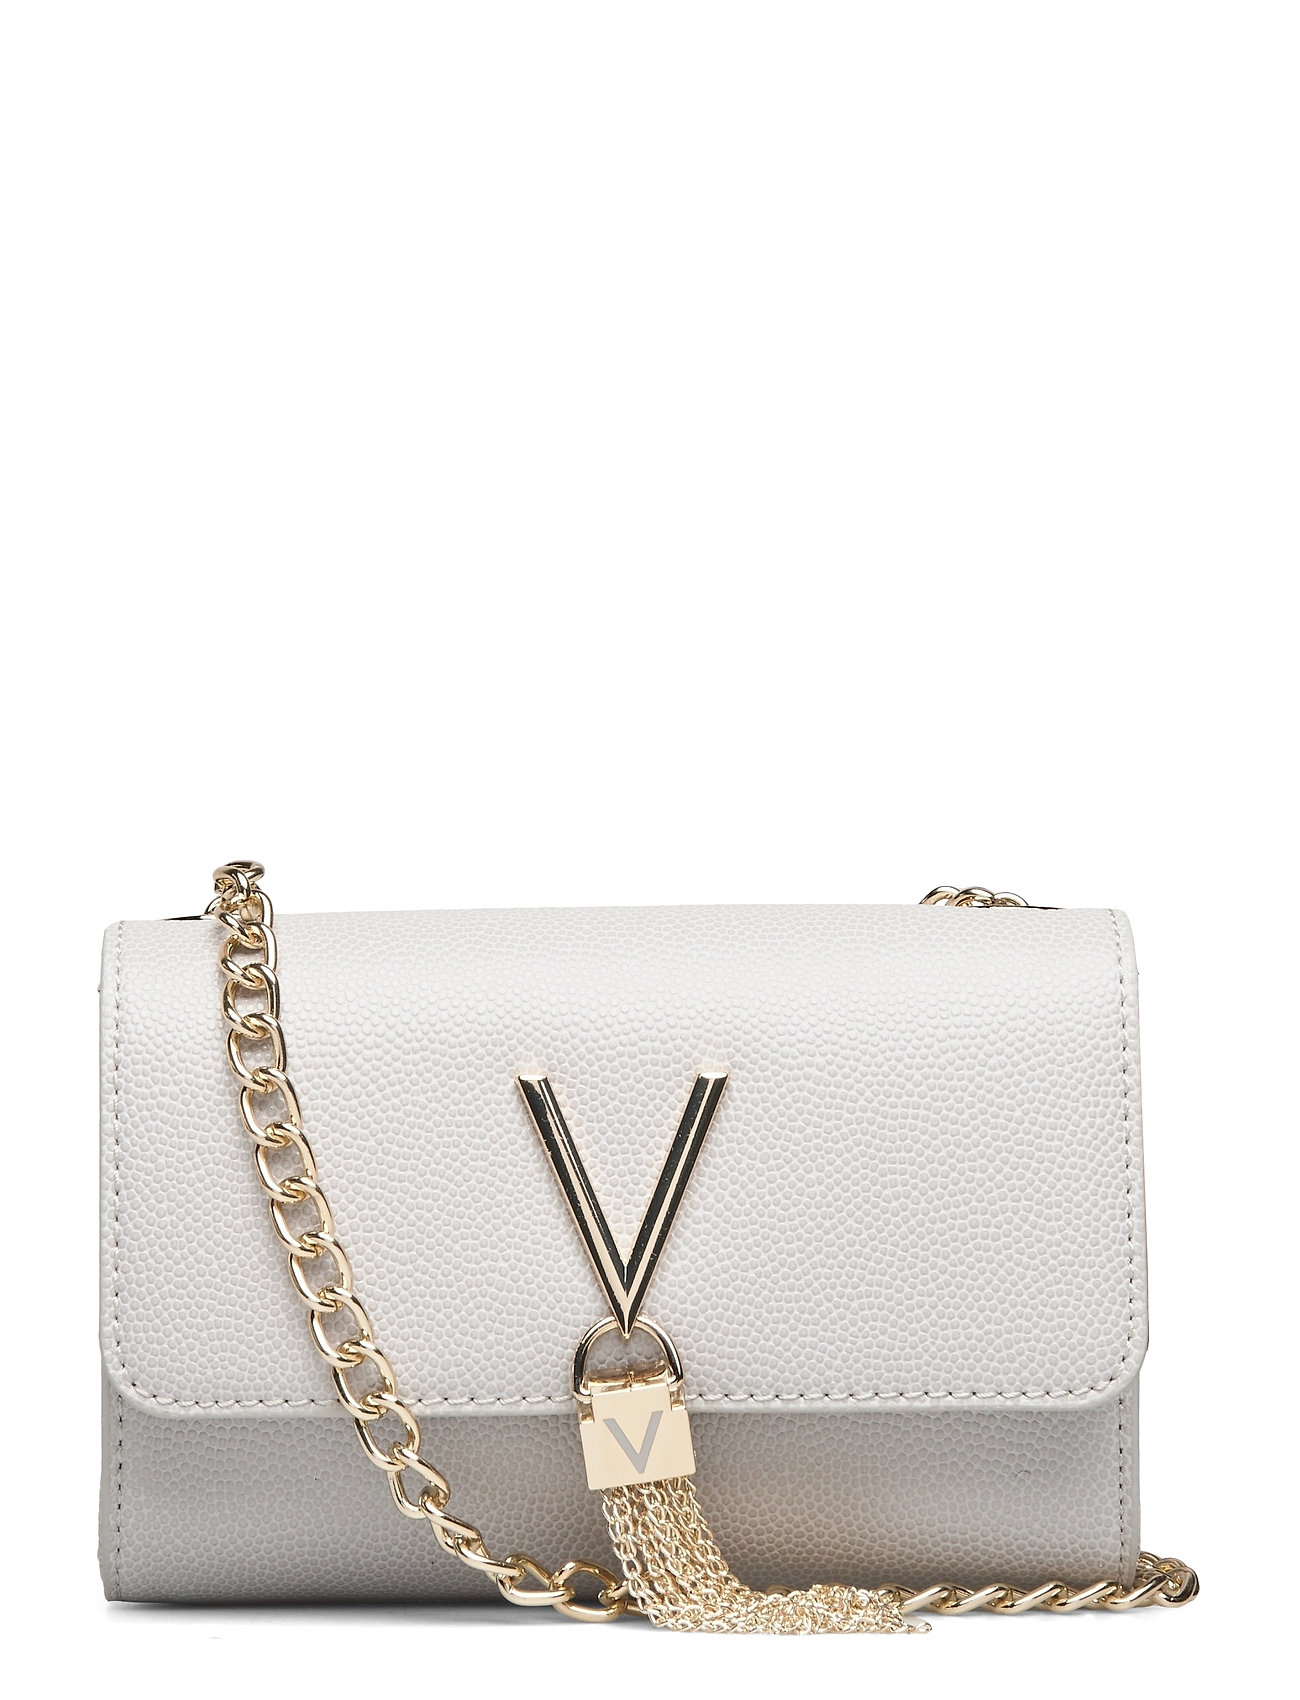 Sort Valentino Bags Bags Small Shoulder Bags - Crossbody Bags Hvid Valentino Bags skuldertasker for dame - Pashion.dk